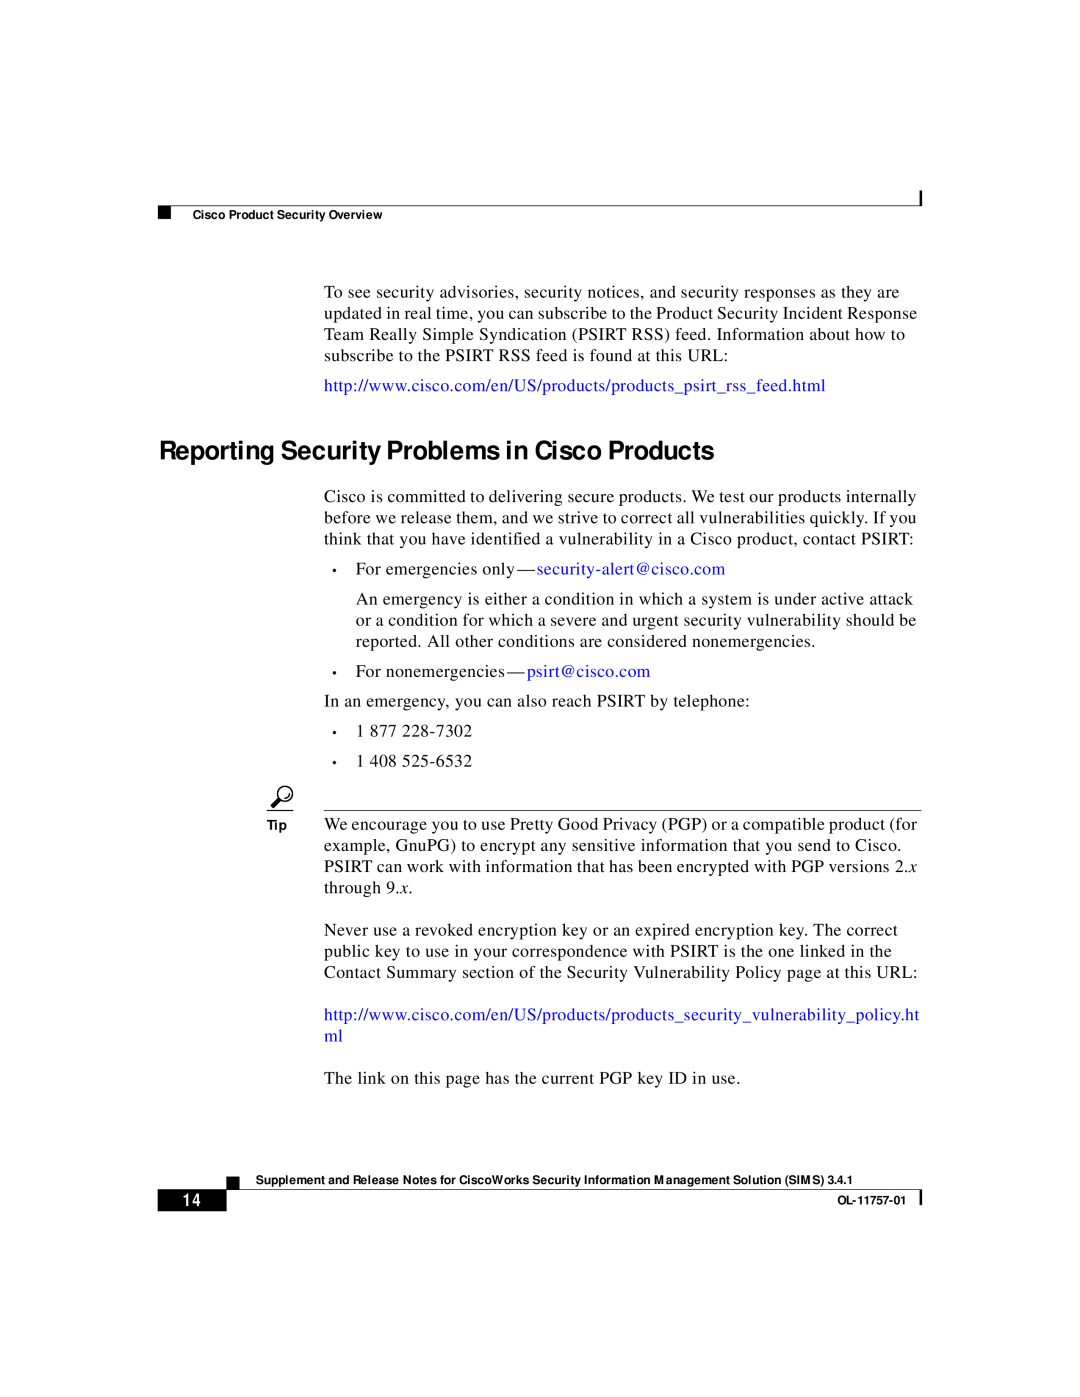 Cisco Systems OL-11757-01 manual Reporting Security Problems in Cisco Products 